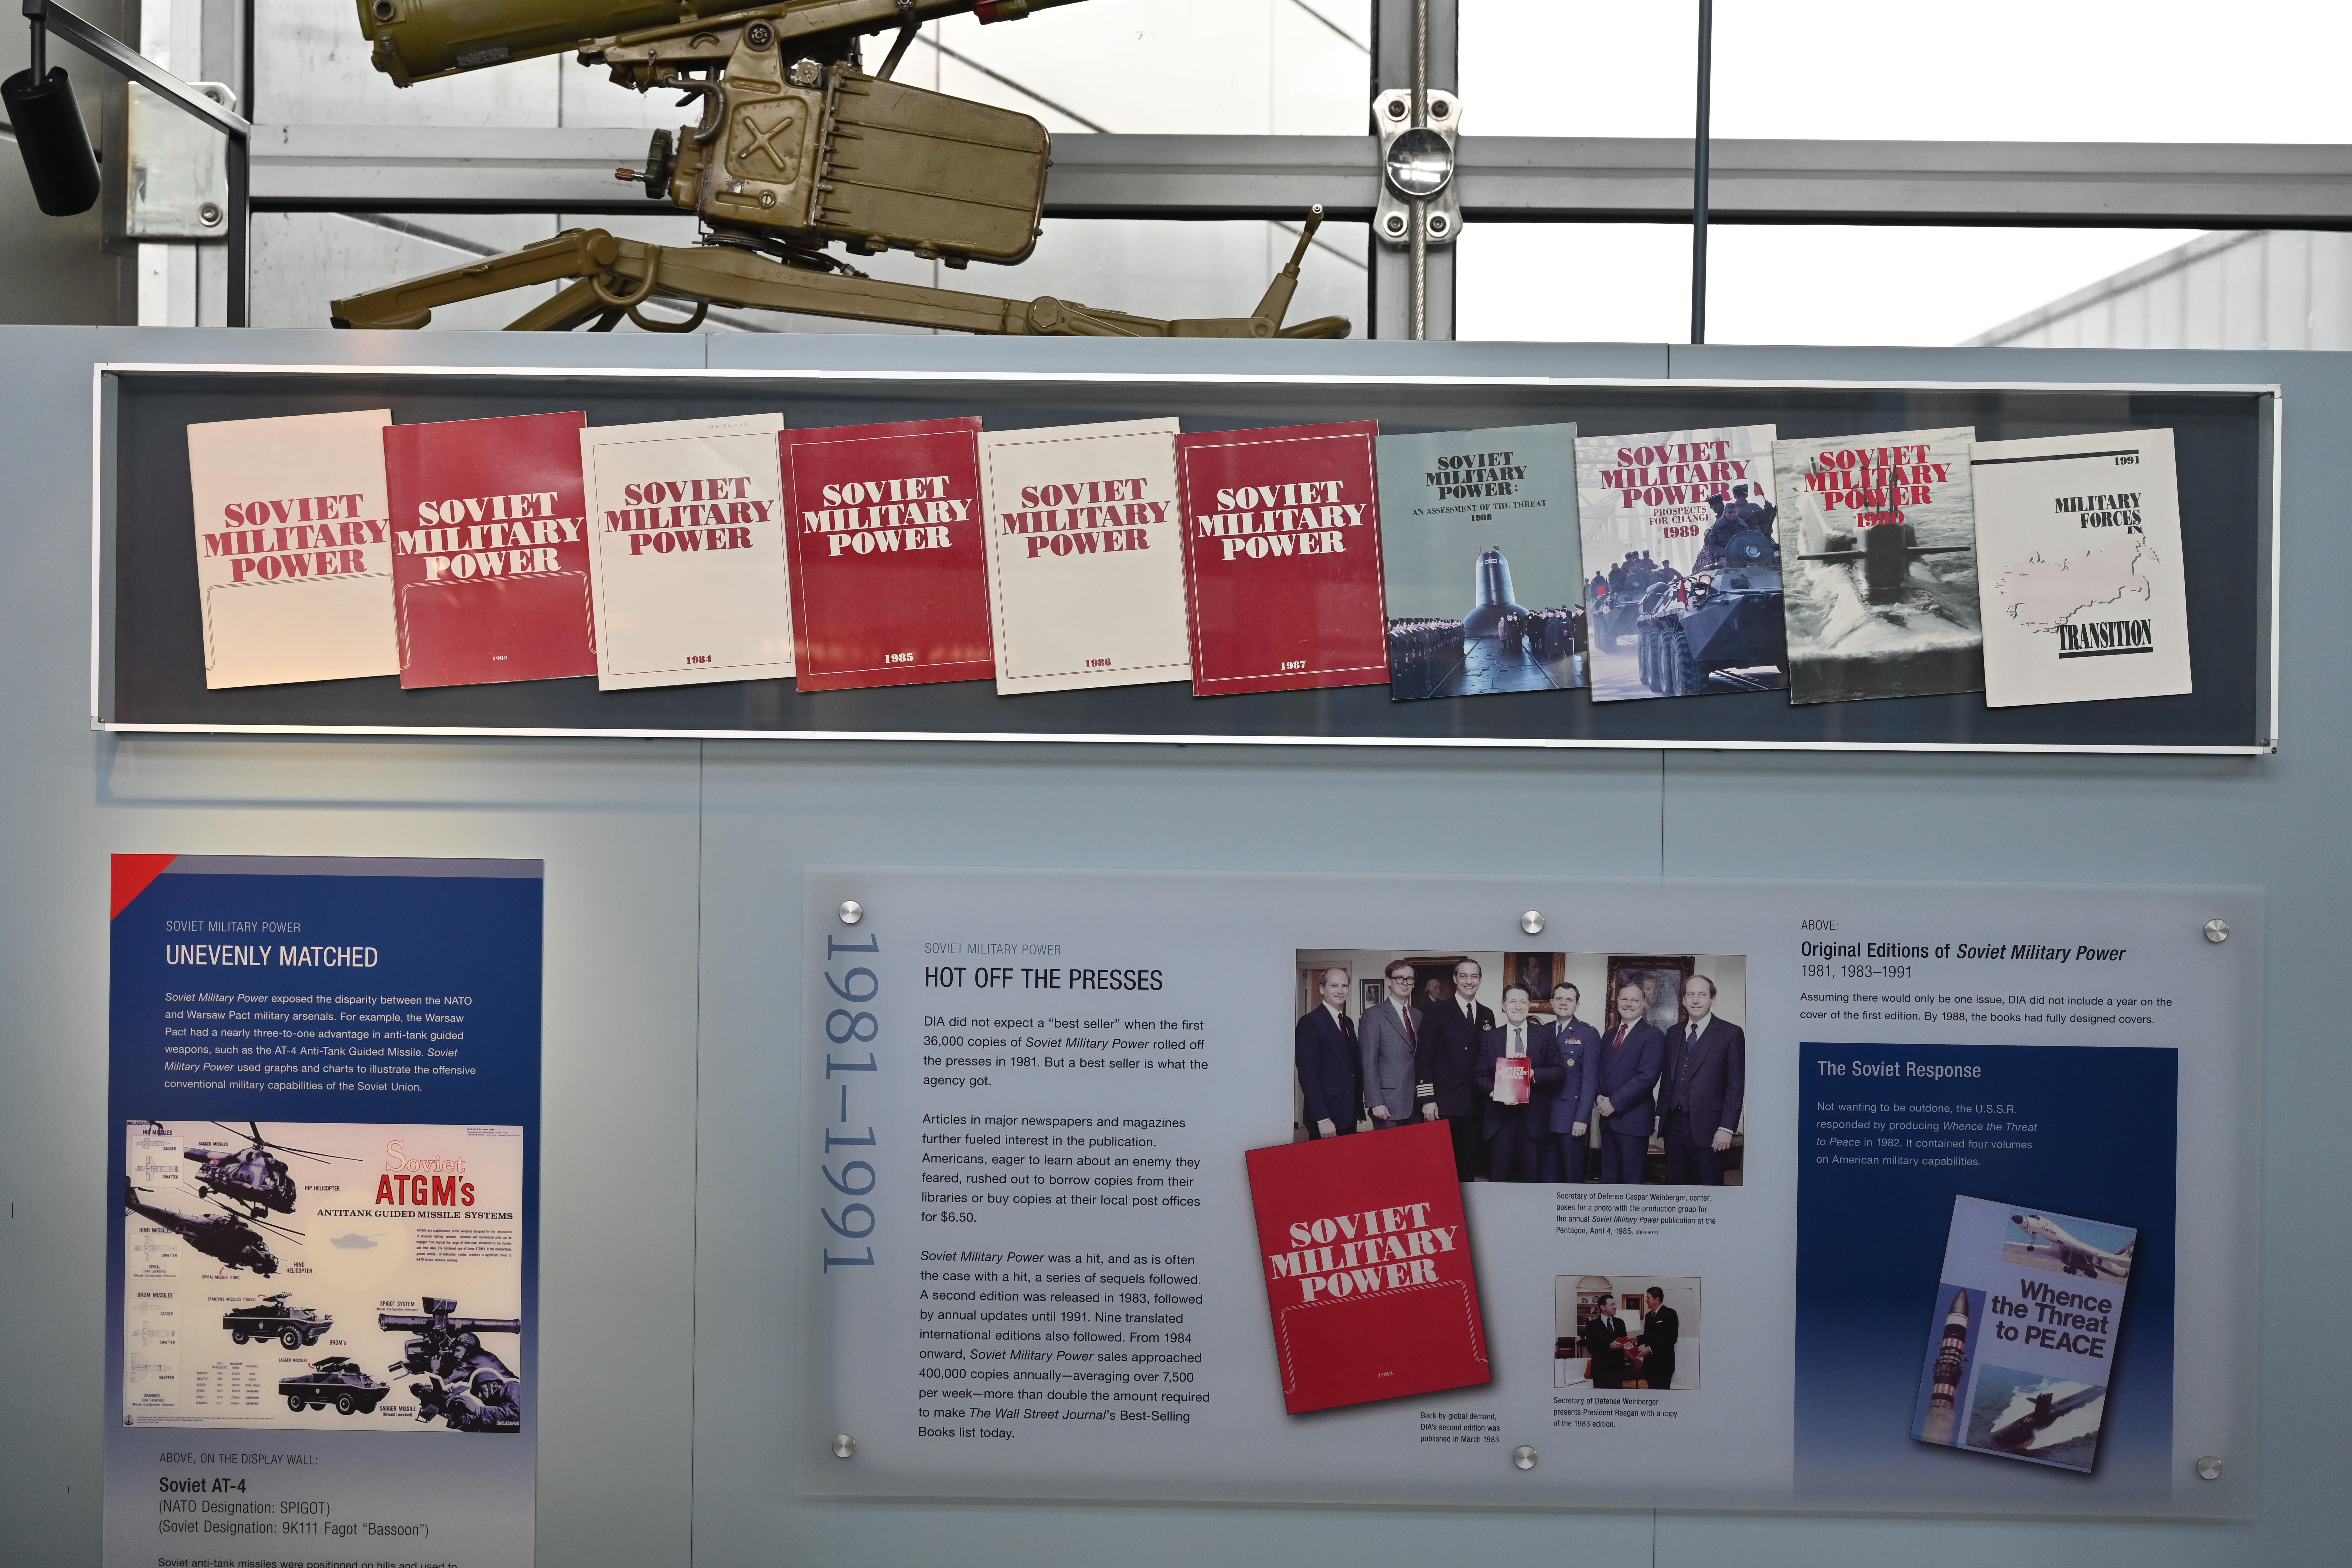 Image of the Soviet Military Power display in the Museum with previous prints of publications and informational text sections.